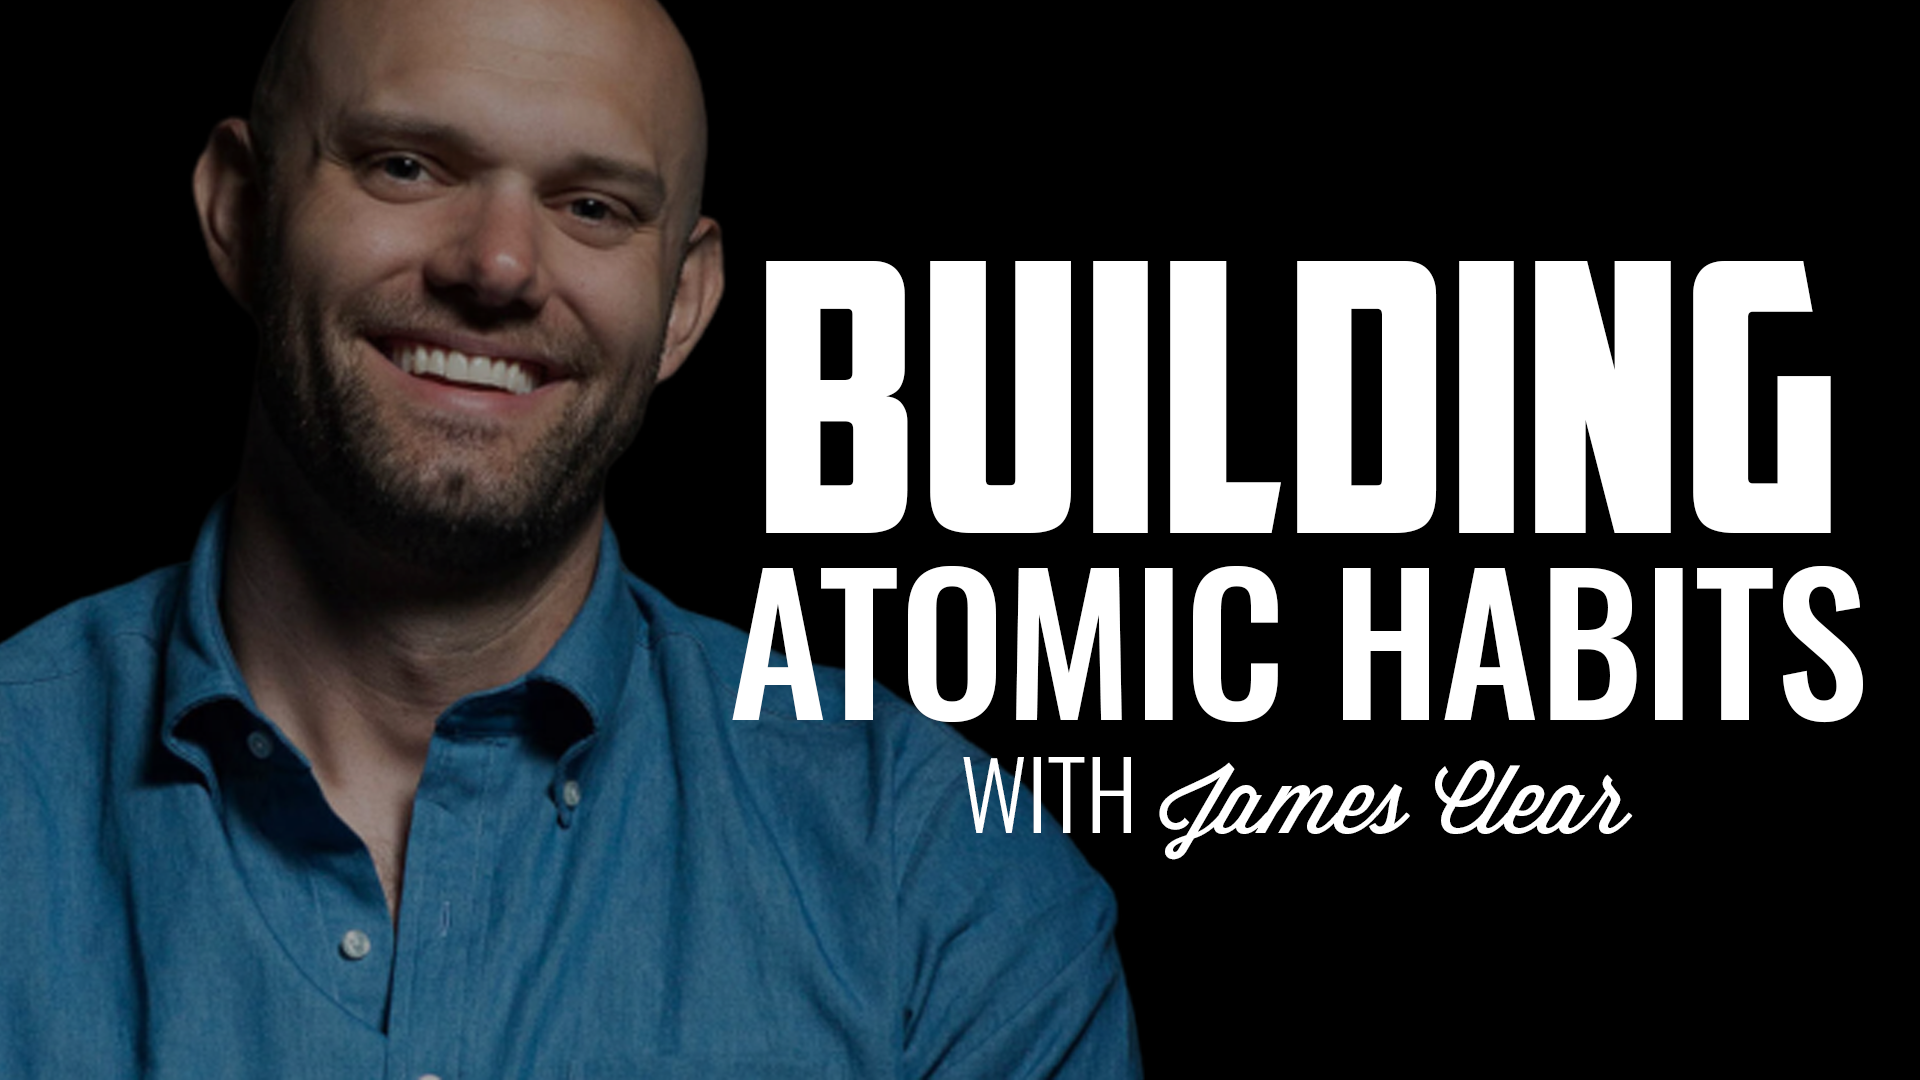 Clear James "Atomic Habits". James Clear Biography. James clear